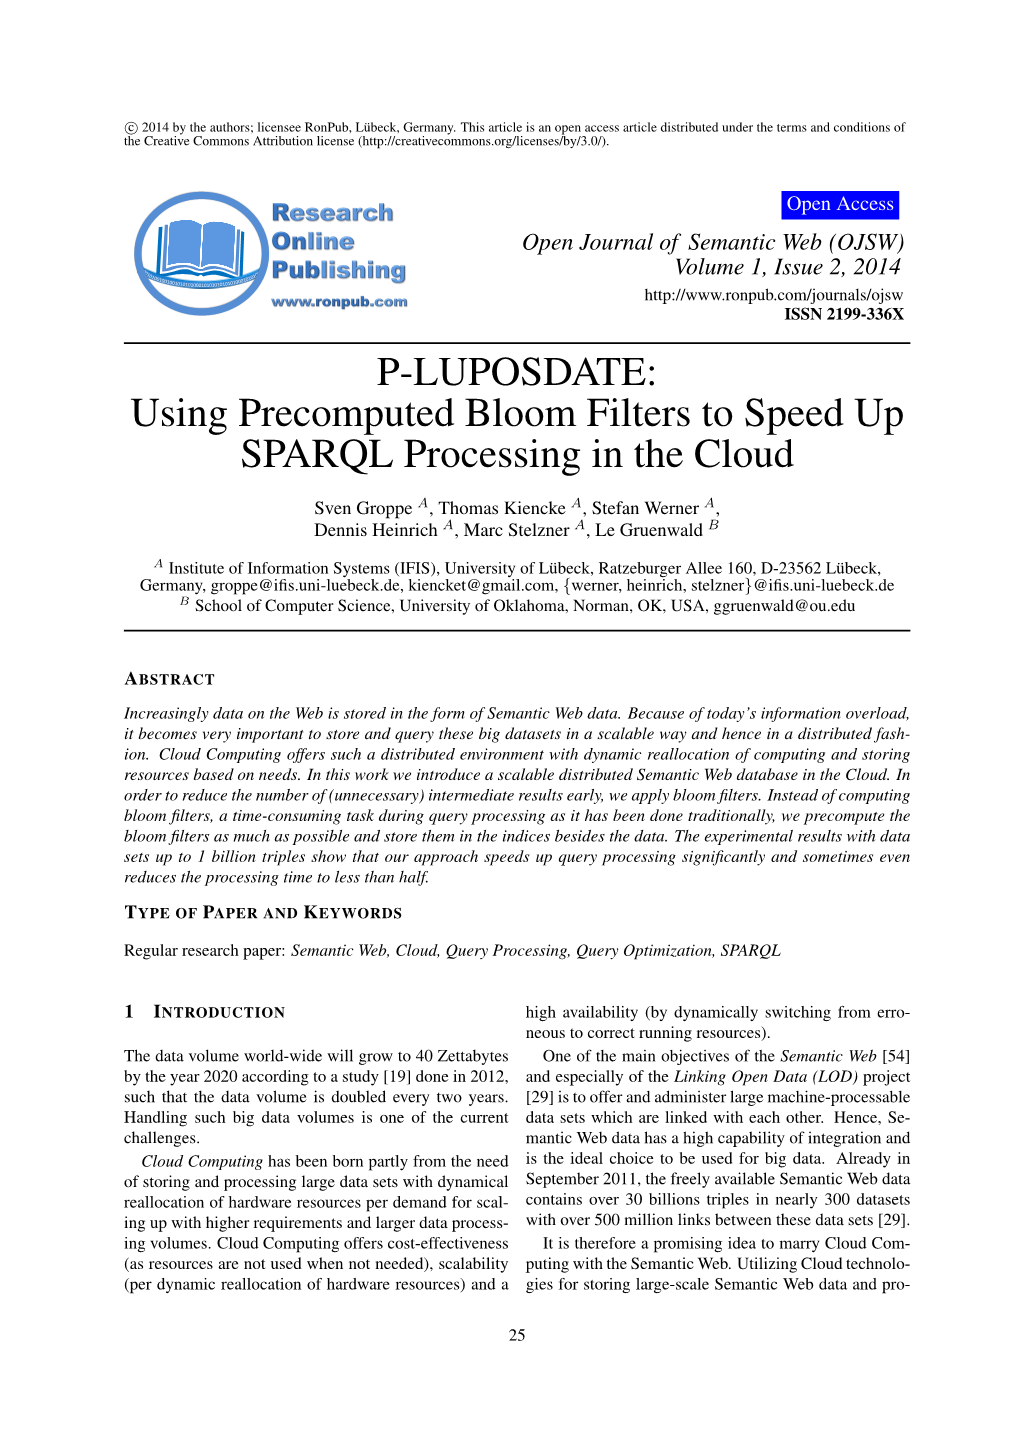 Using Precomputed Bloom Filters to Speed up SPARQL Processing in the Cloud